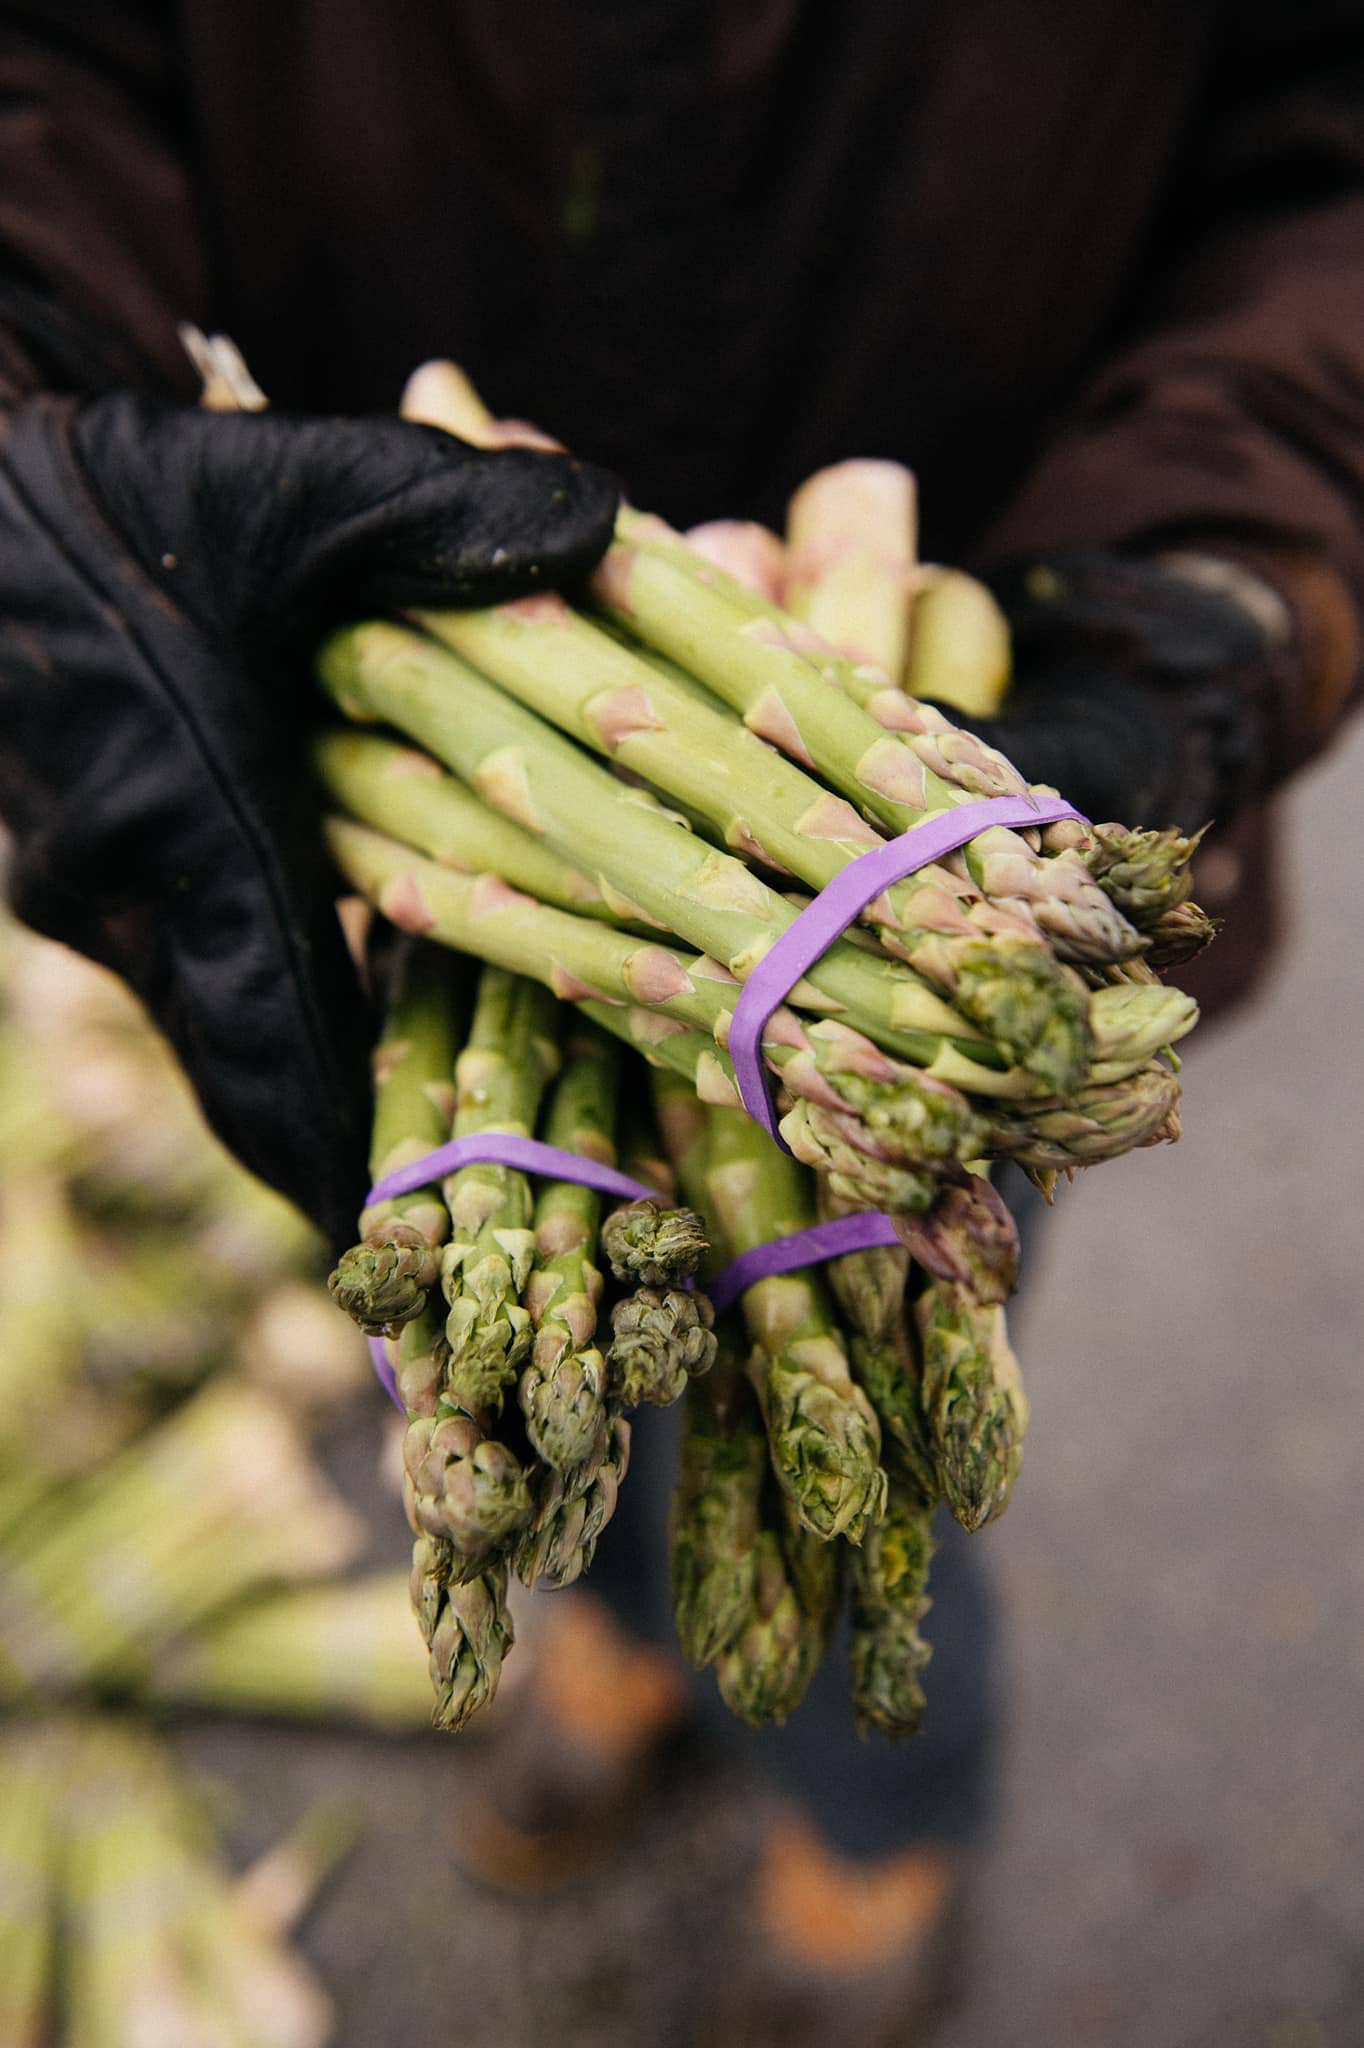 A One Generation Away volunteer holds asparagus at a mobile food pantry distribution in Franklin, Tennessee at Centennial High School in 2022. Photo credit goes to Kris Orlowski.